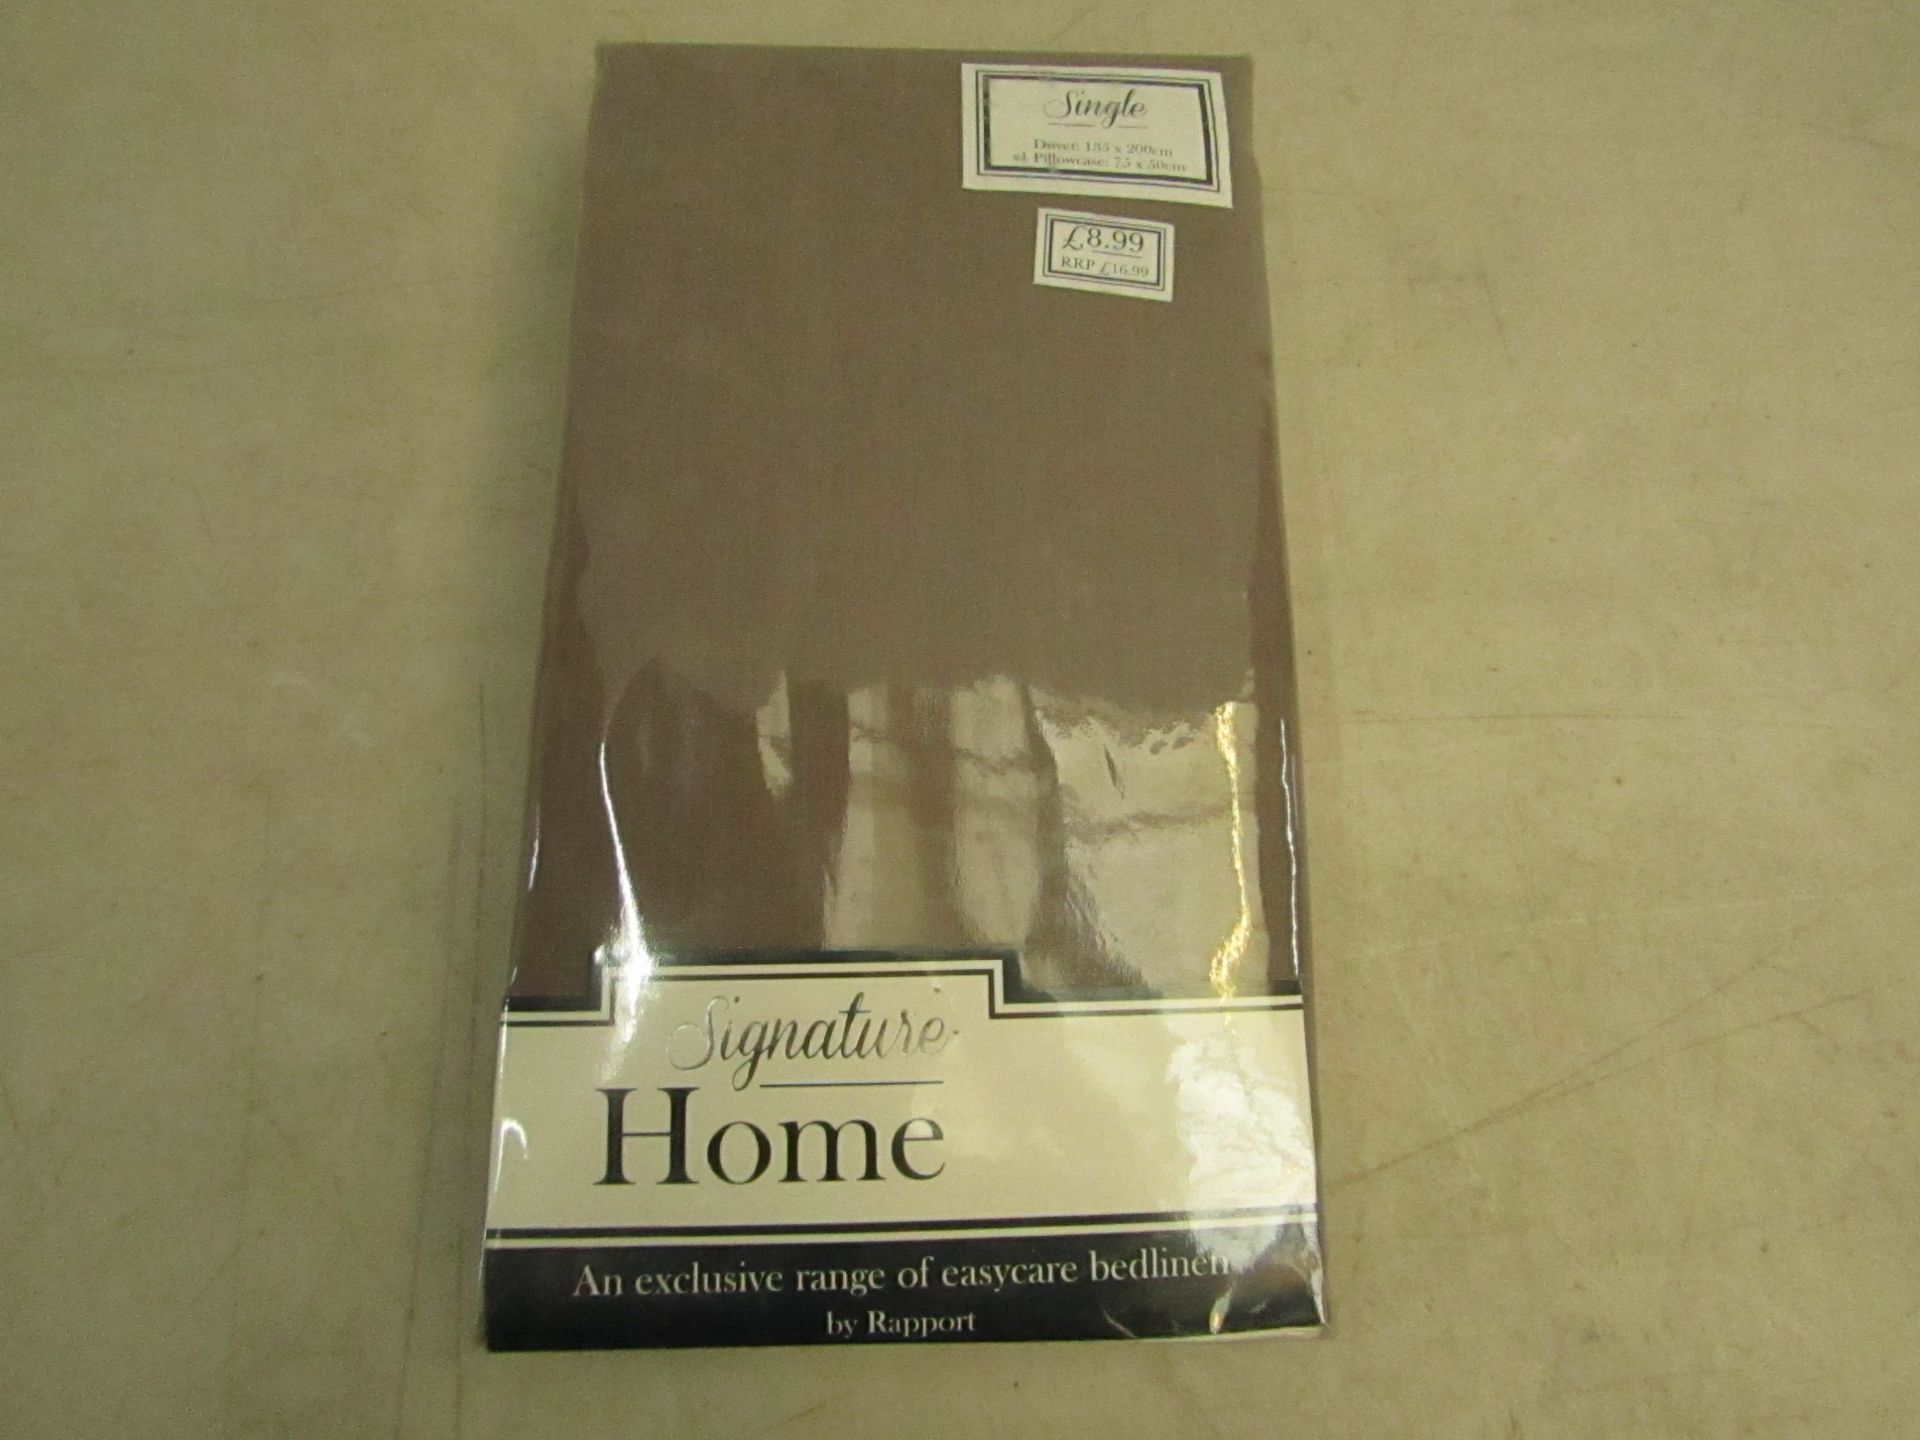 Signature Home single duvet 135 x 200cm and pillowcase 75 x 50cm. new and in packaging.